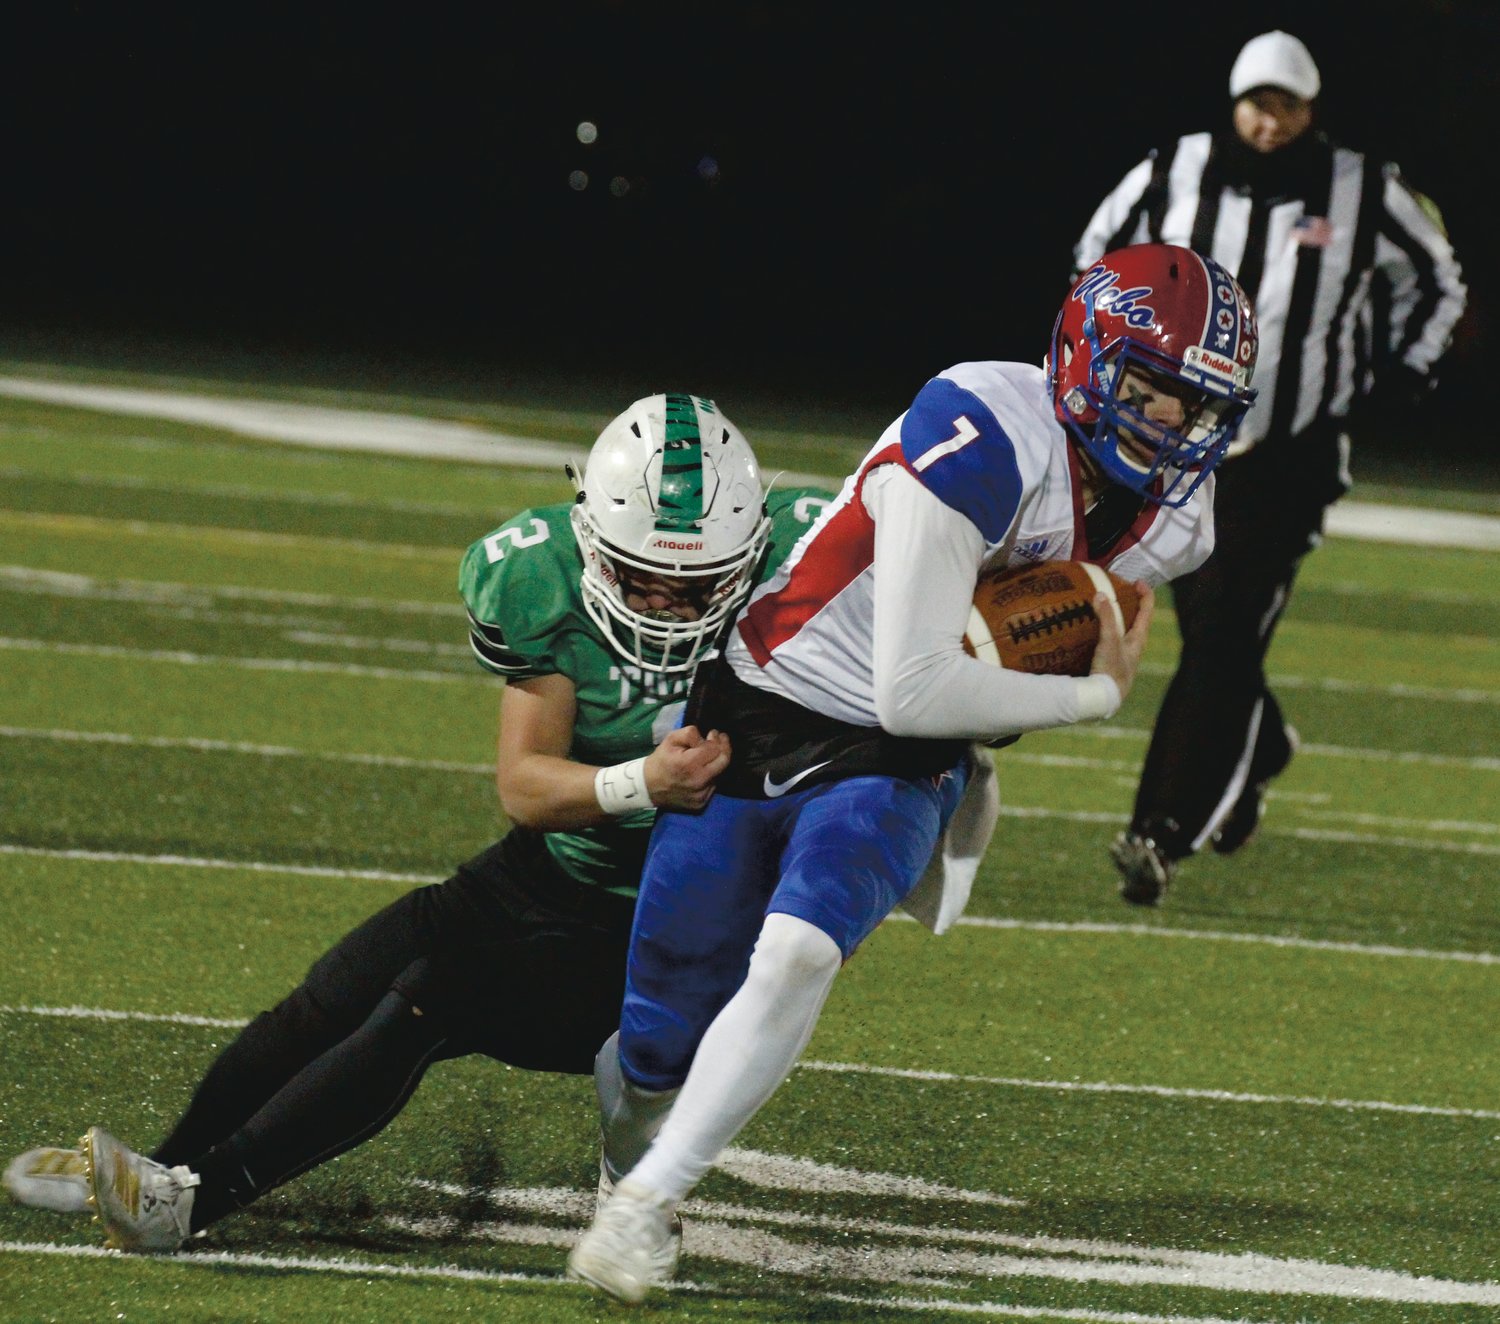 Western Boone quarterback Spencer Wright tries to break free from a tackle.